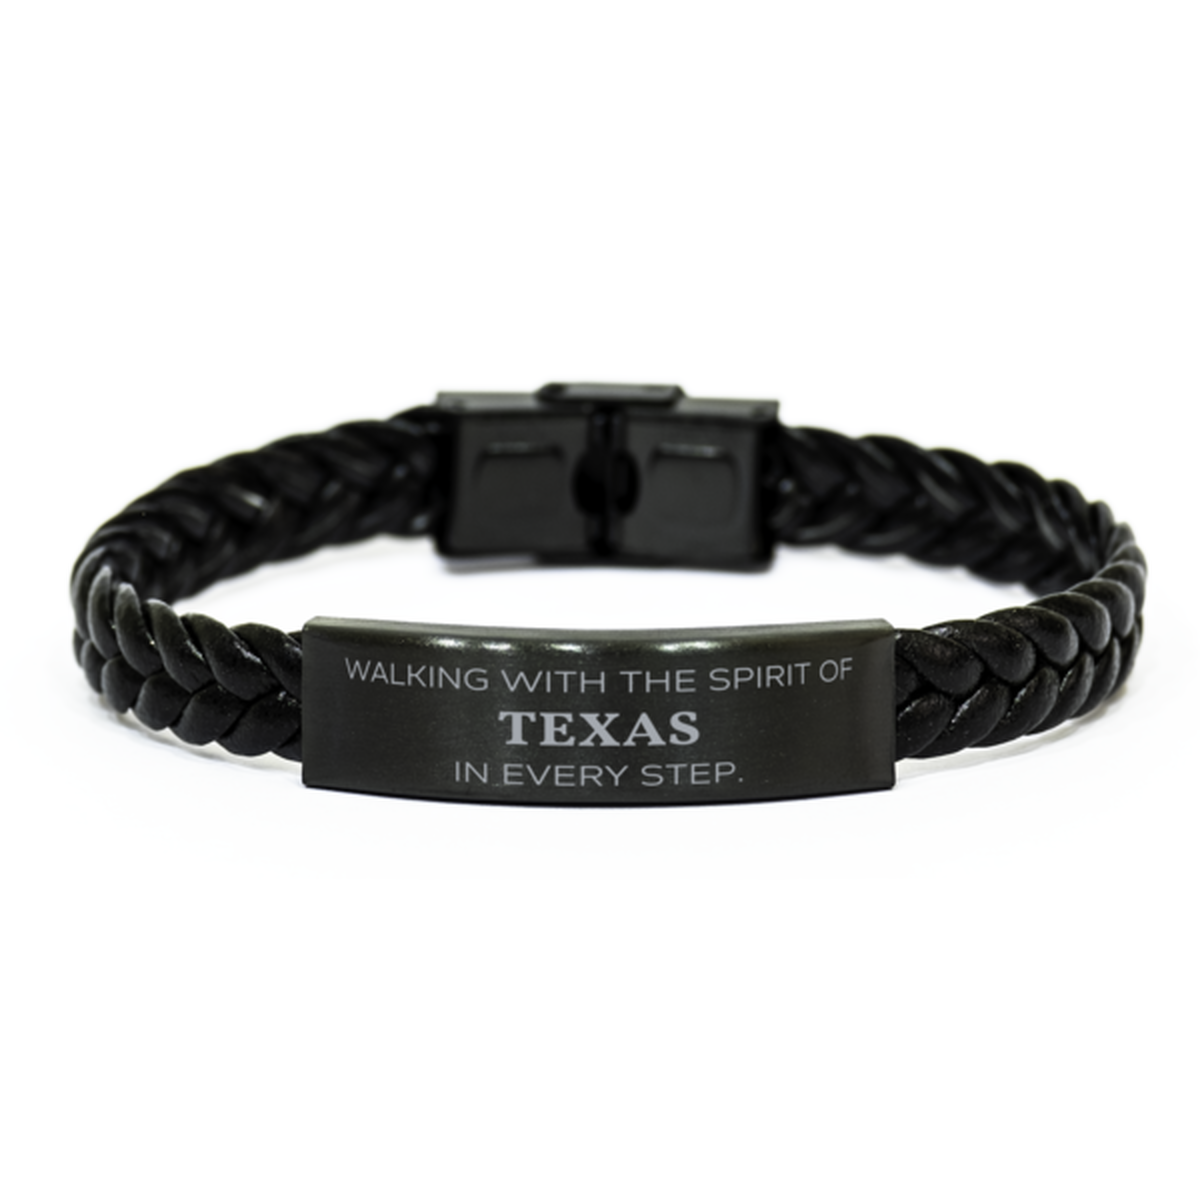 Texas Gifts, Walking with the spirit, Love Texas Birthday Christmas Braided Leather Bracelet For Texas People, Men, Women, Friends